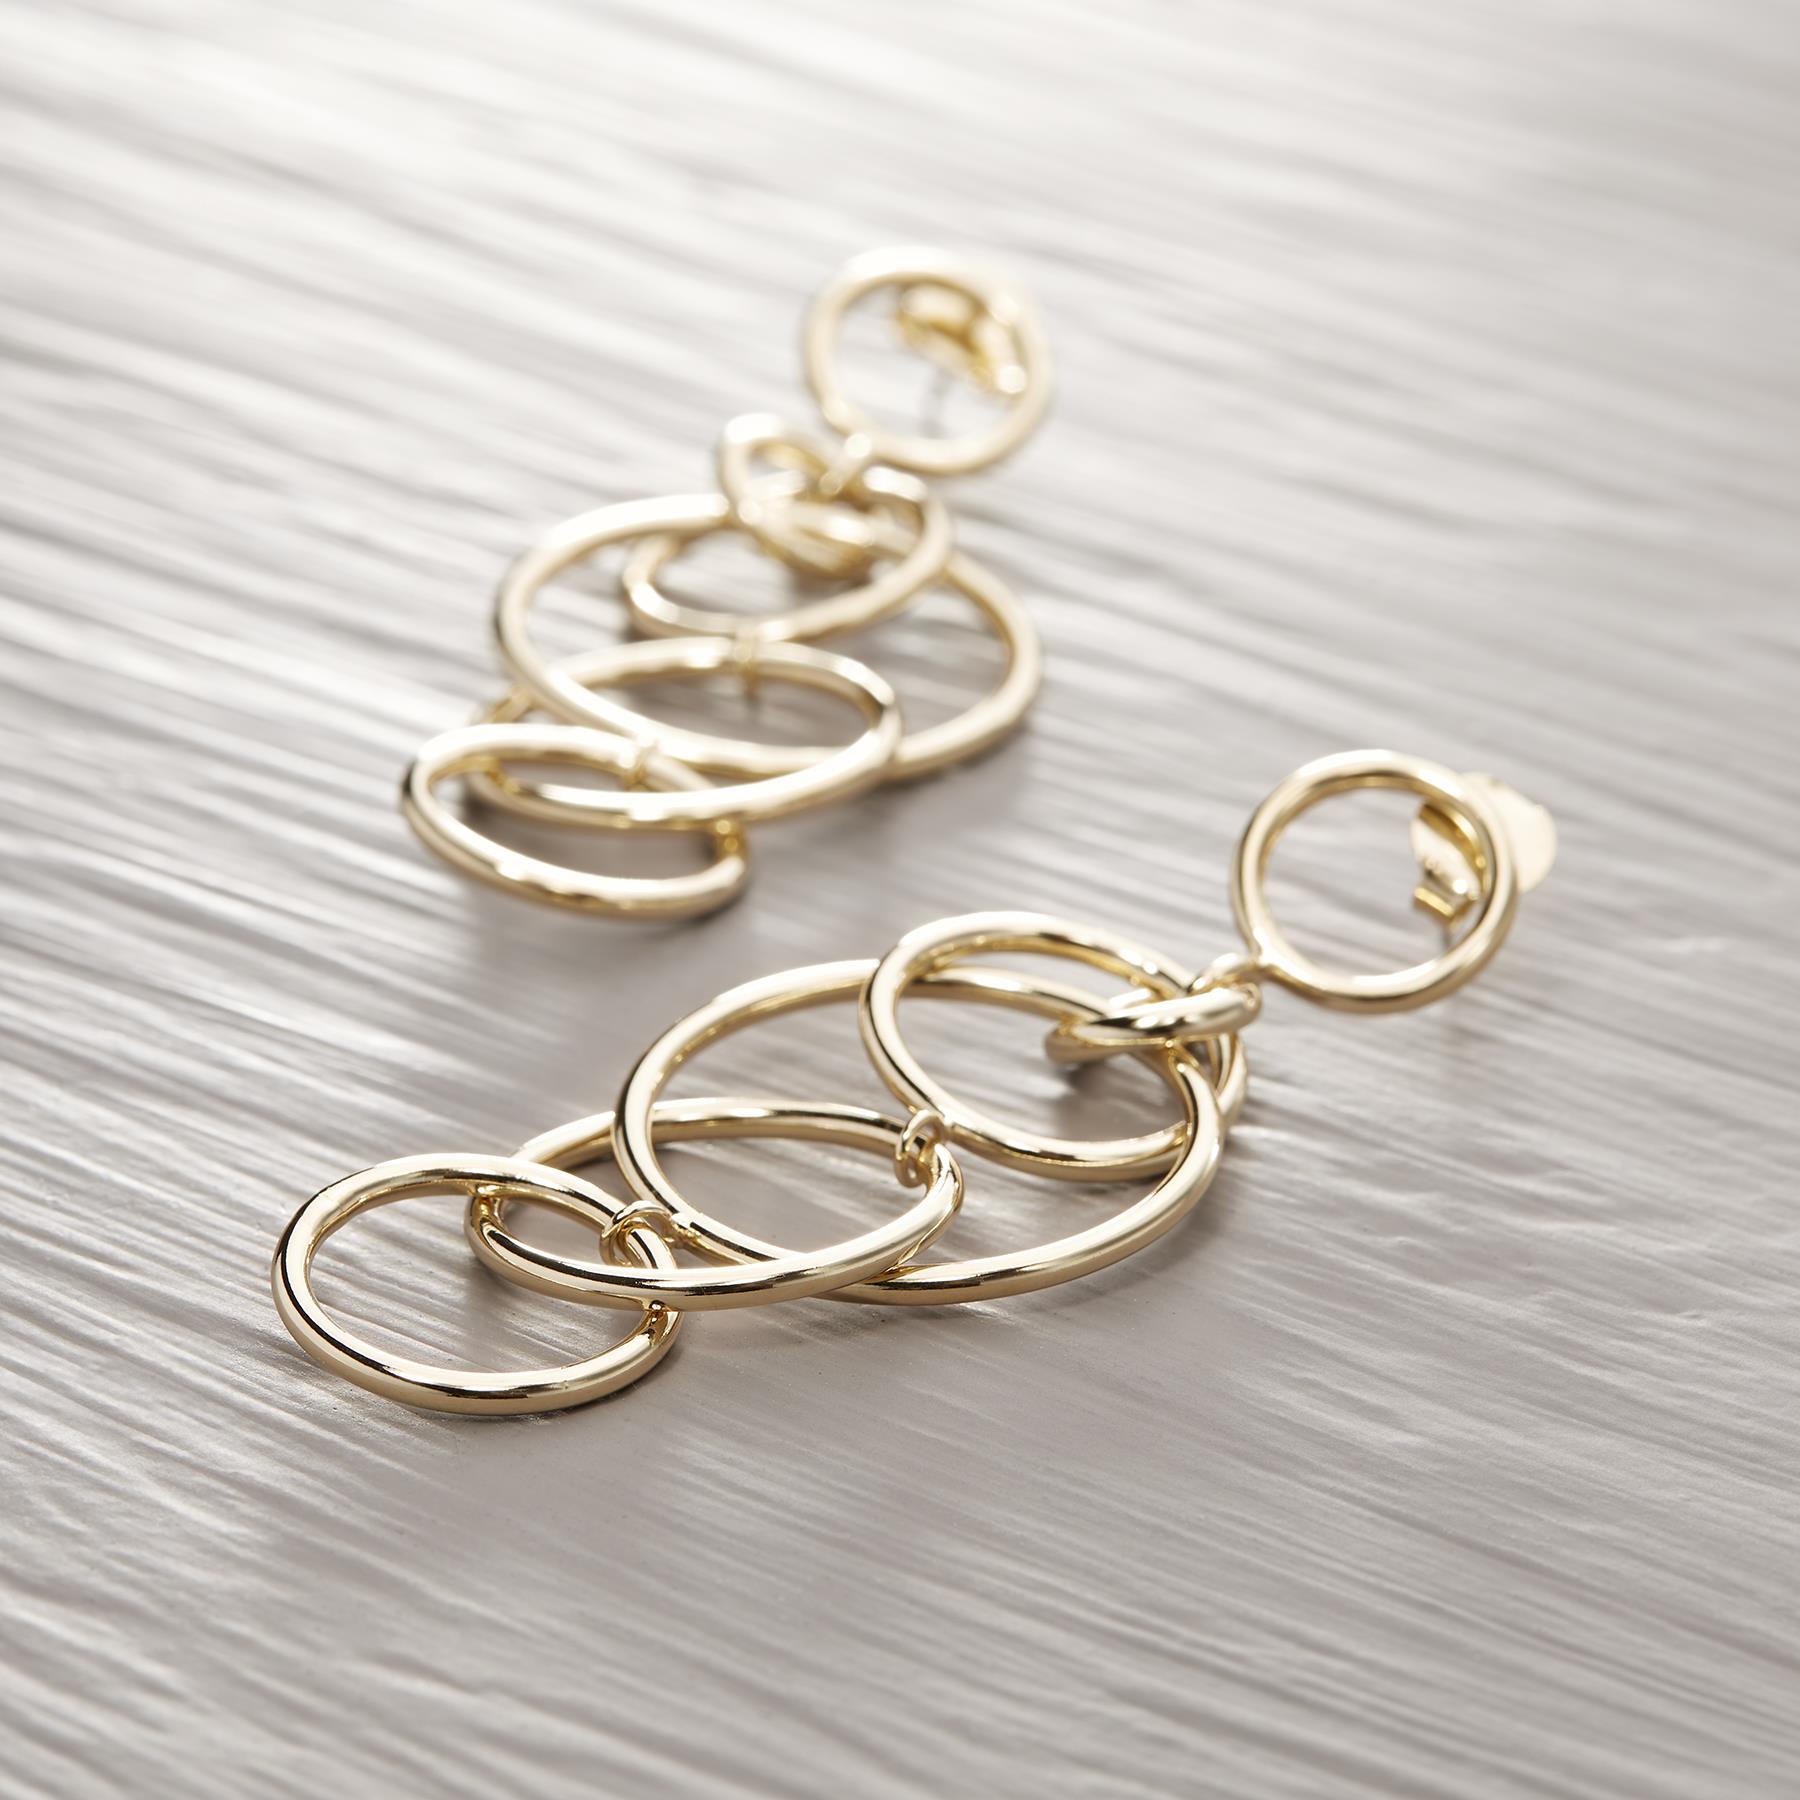 KEEP IT TOGETHER. Chain earrings